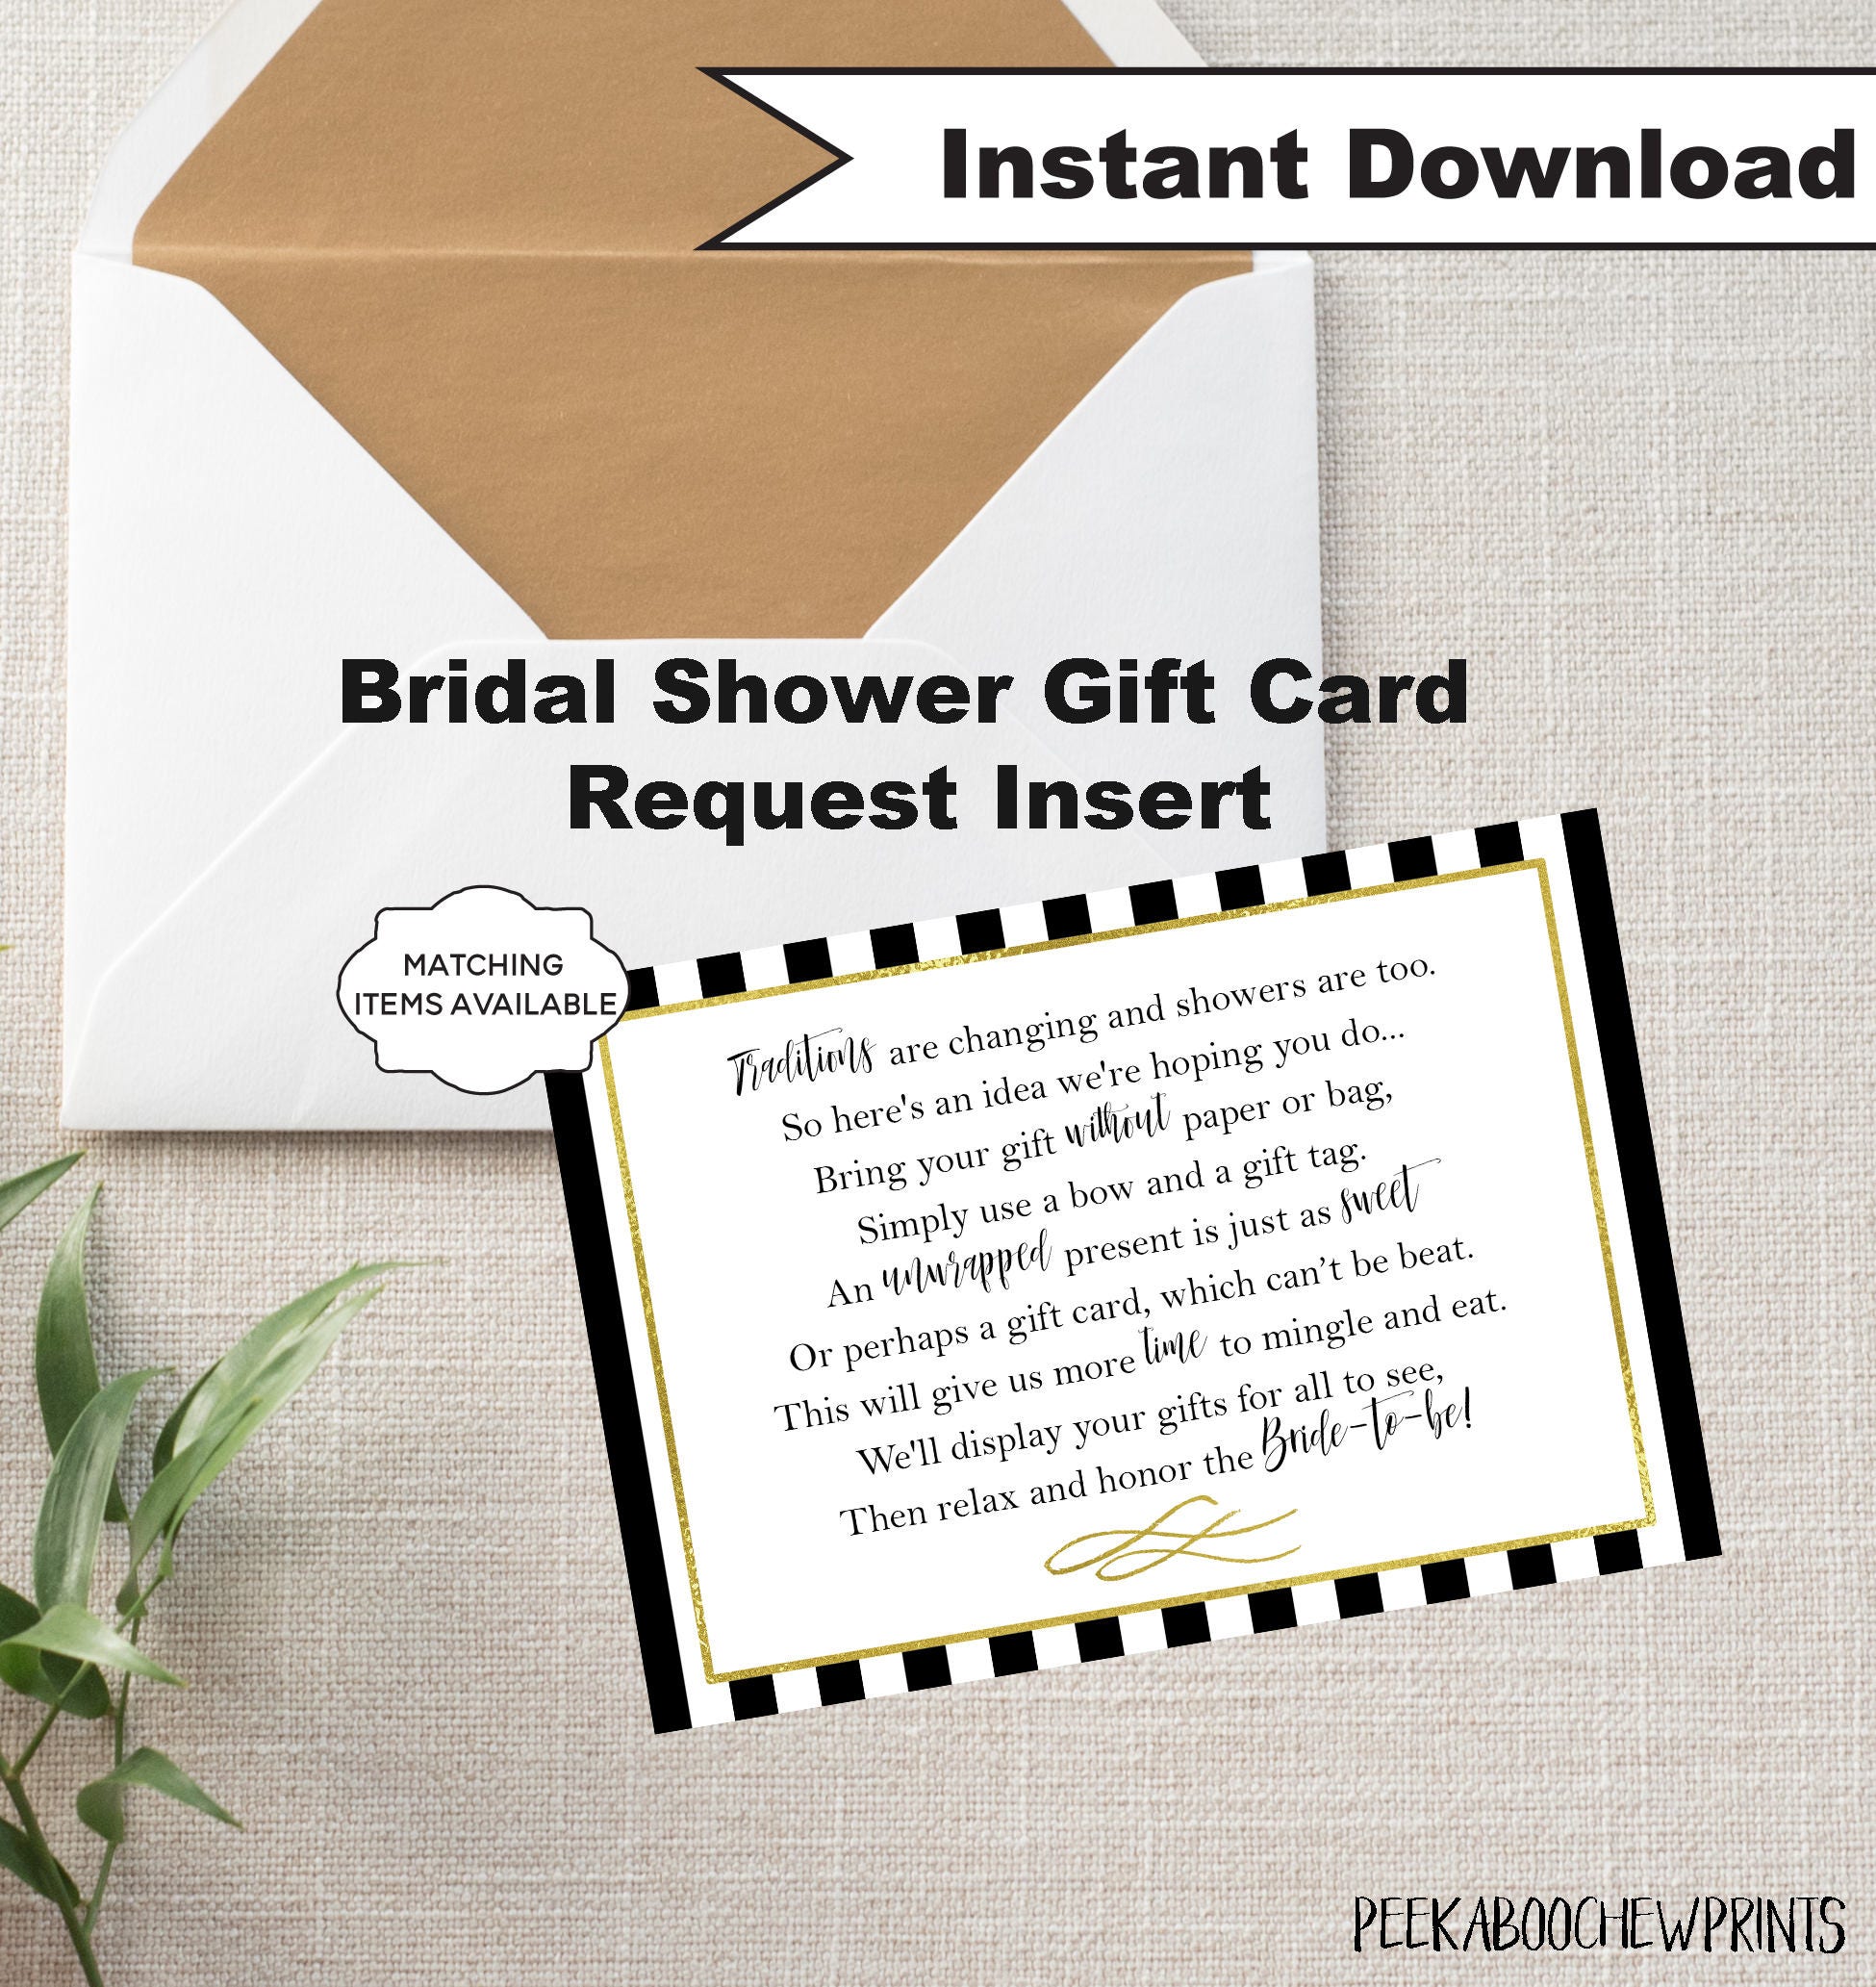 Display Shower / Gift Card Unwrapped Gift Request Poem Insert